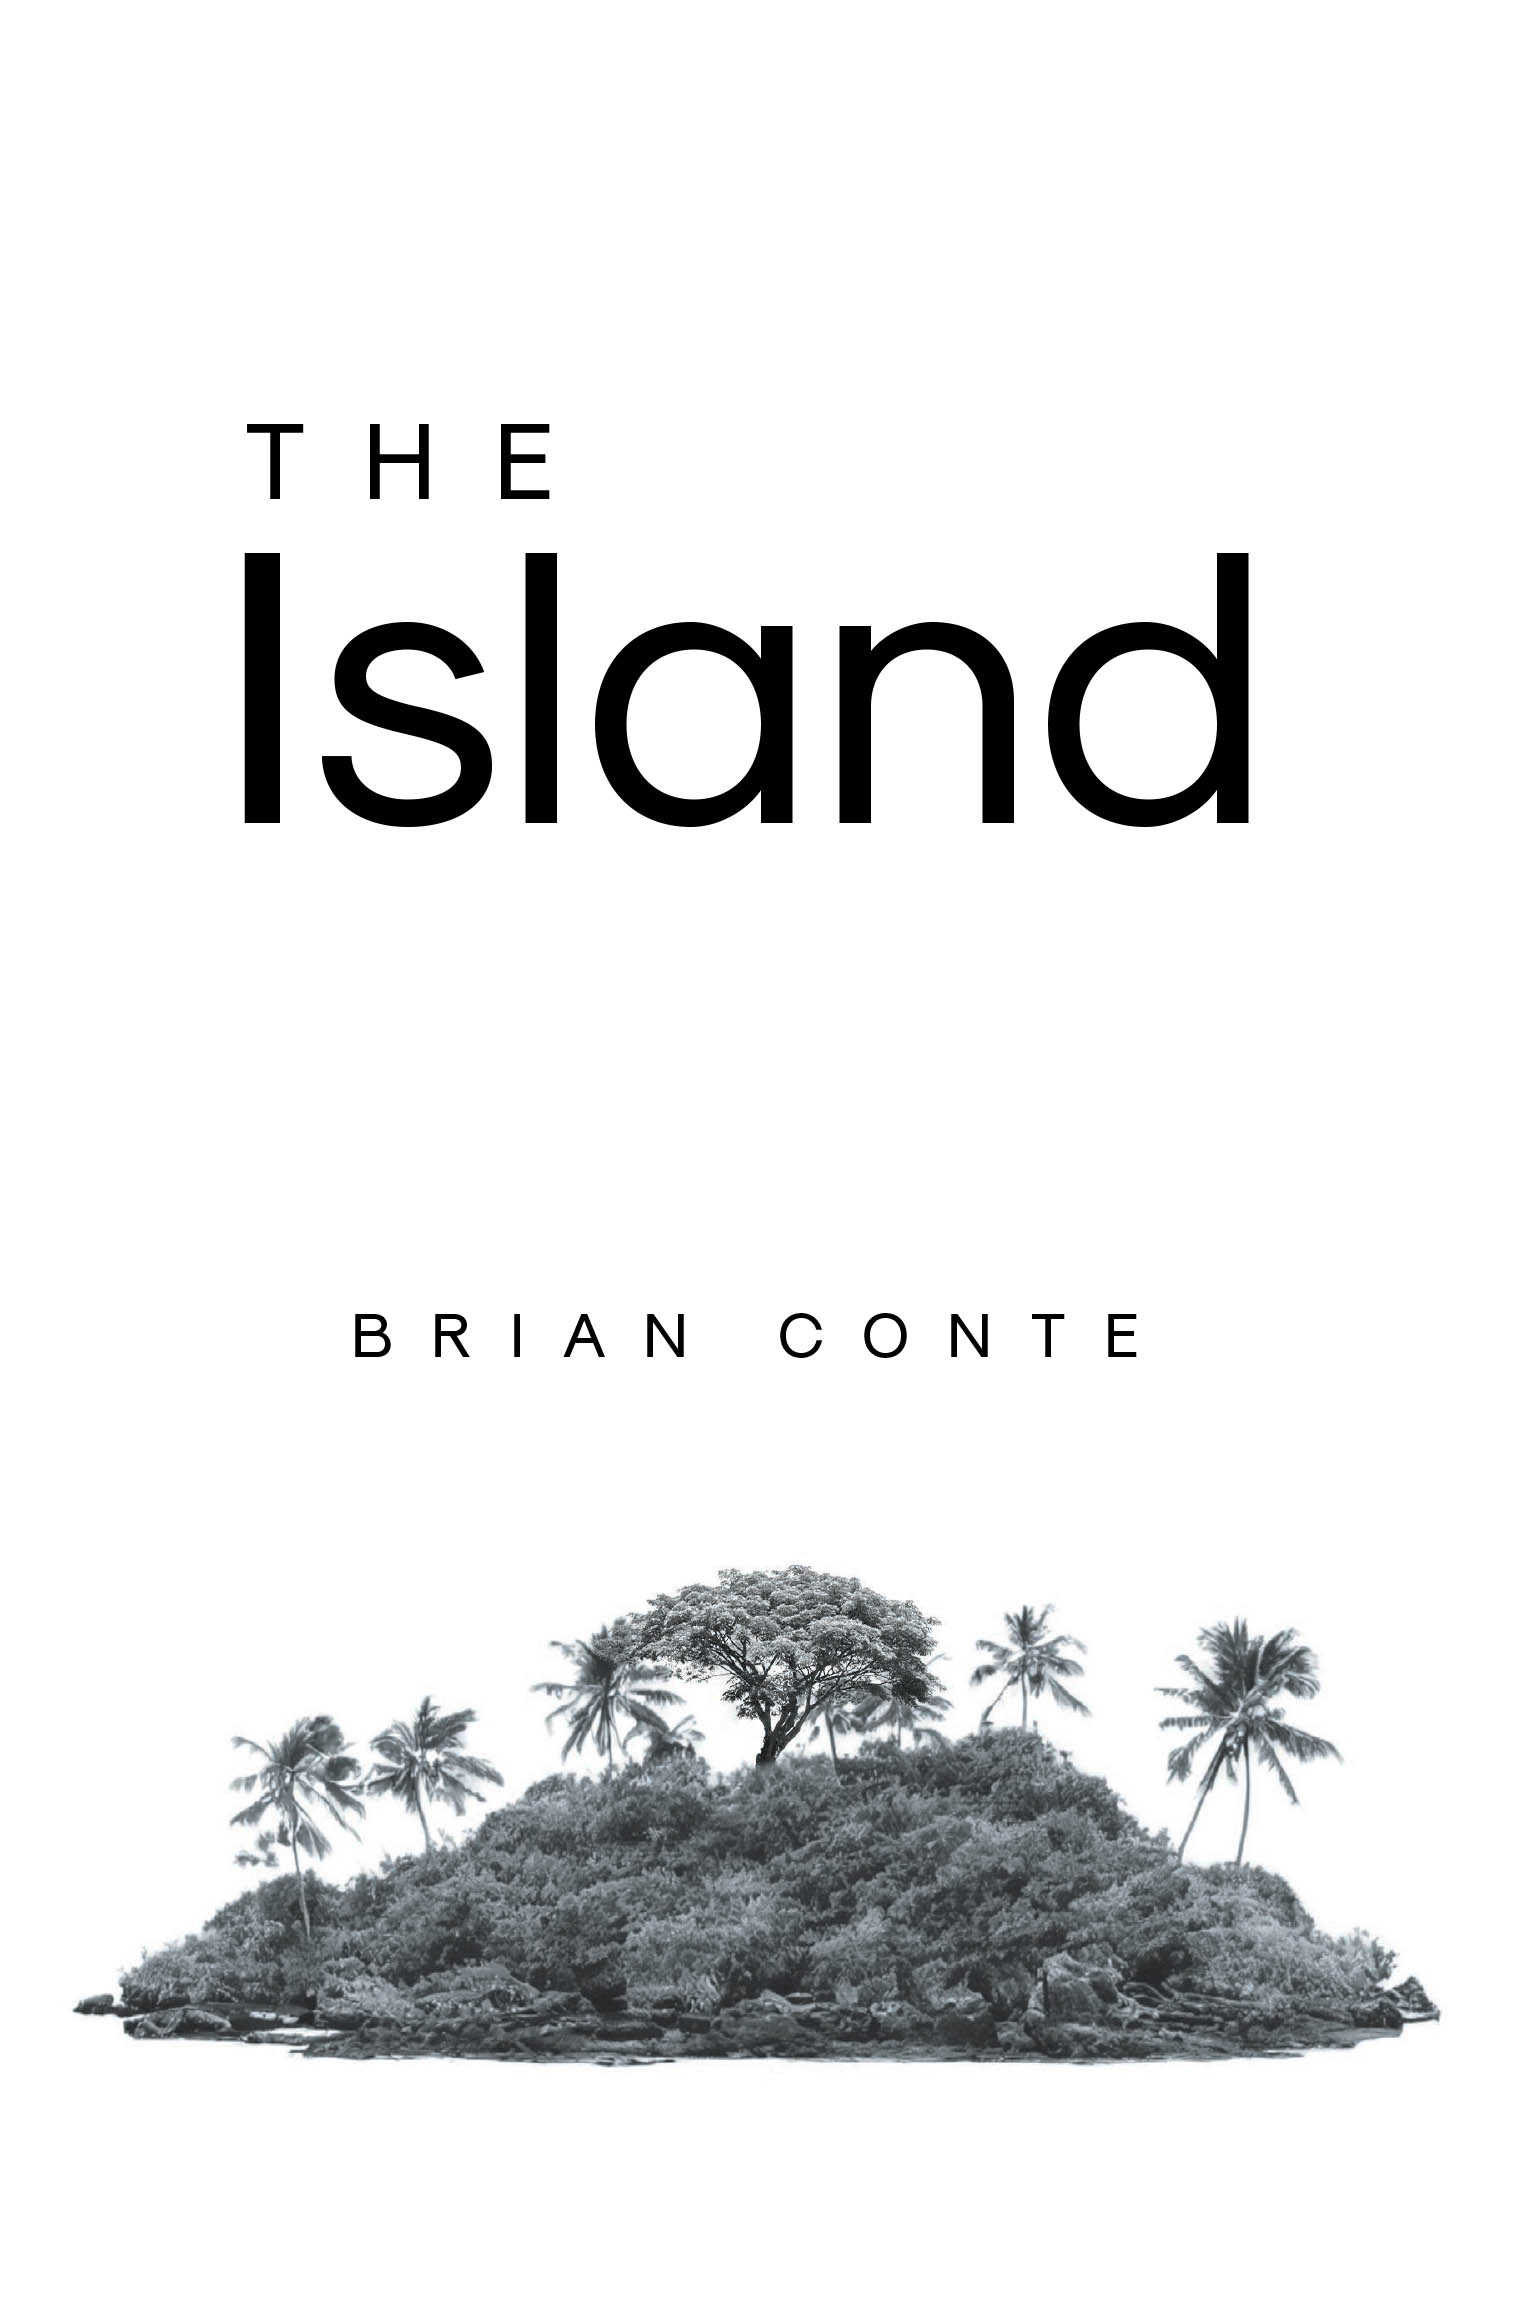 Author Brian Conte’s New Book, "The Island," is a Captivating Tale That Follows a Young Boy’s Journey of Discovery and Survival While on a Deserted Island